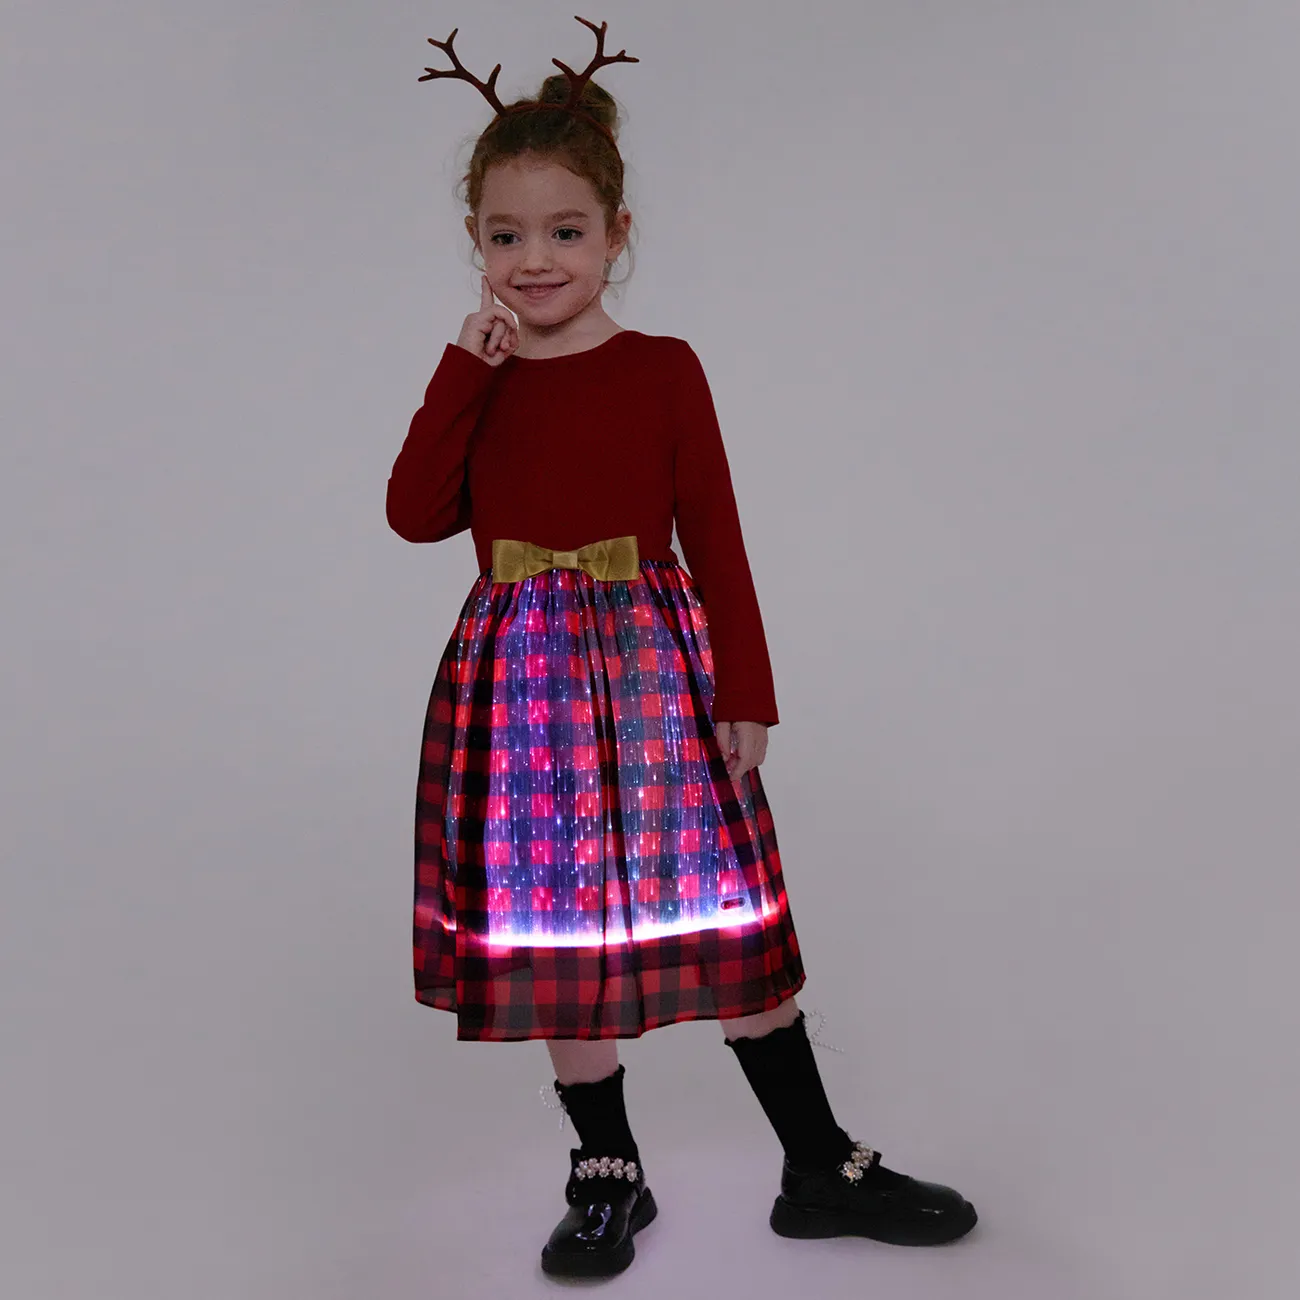 Go-Glow Christmas Illuminating Dress with Light Up Skirt with Checkered Pattern Including Controller (Built-In Battery) Red big image 1